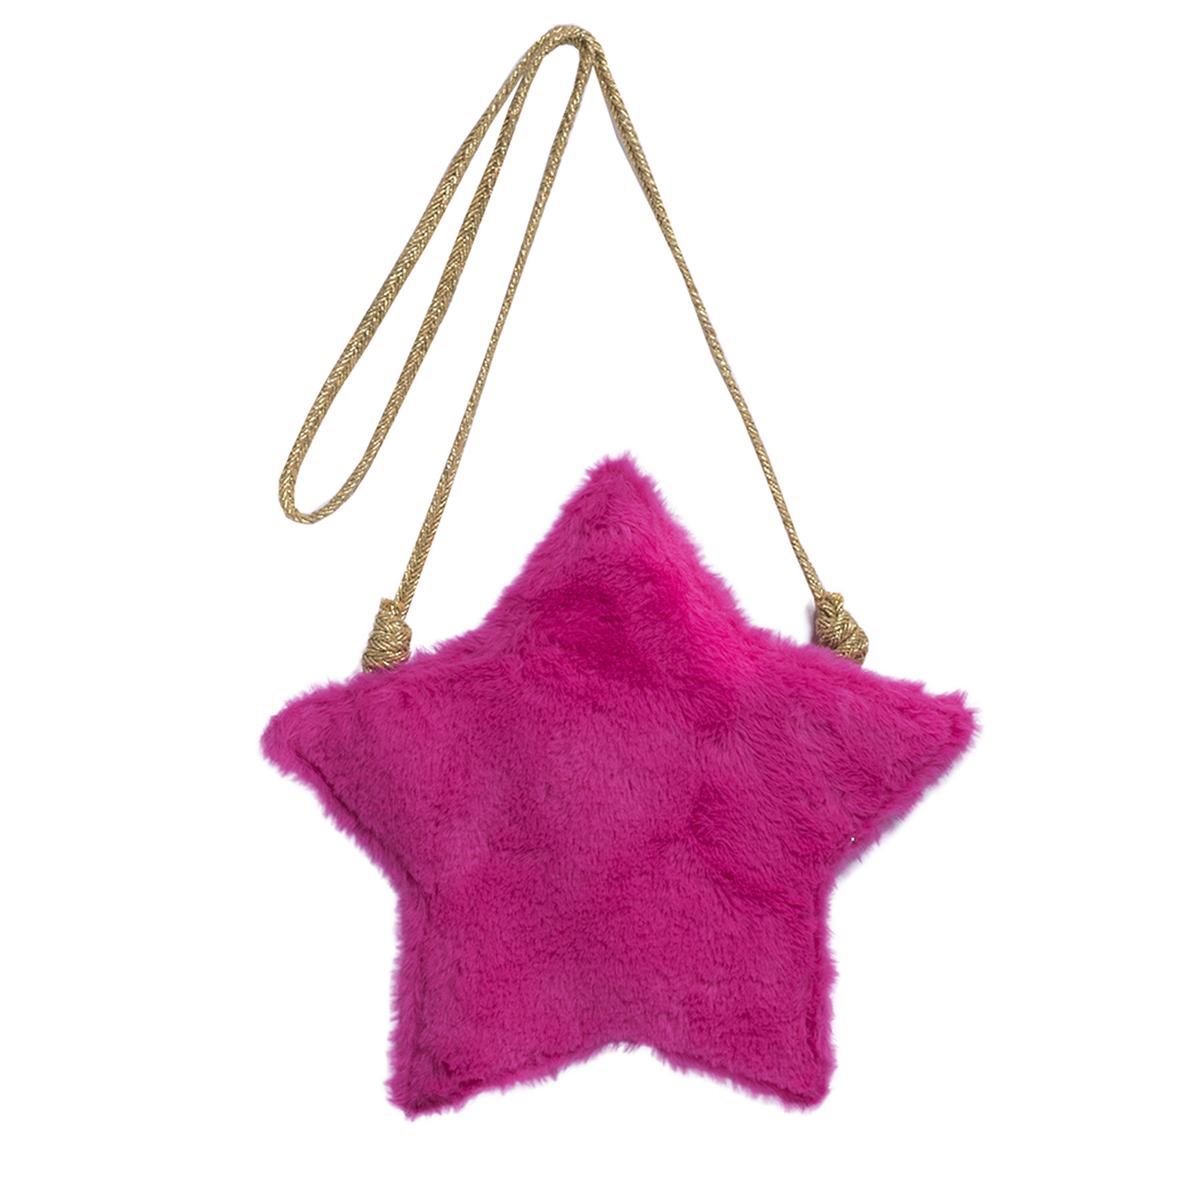 Girls fucisa pink faux fur long strapped purse in the shape of a star. By Imoga.